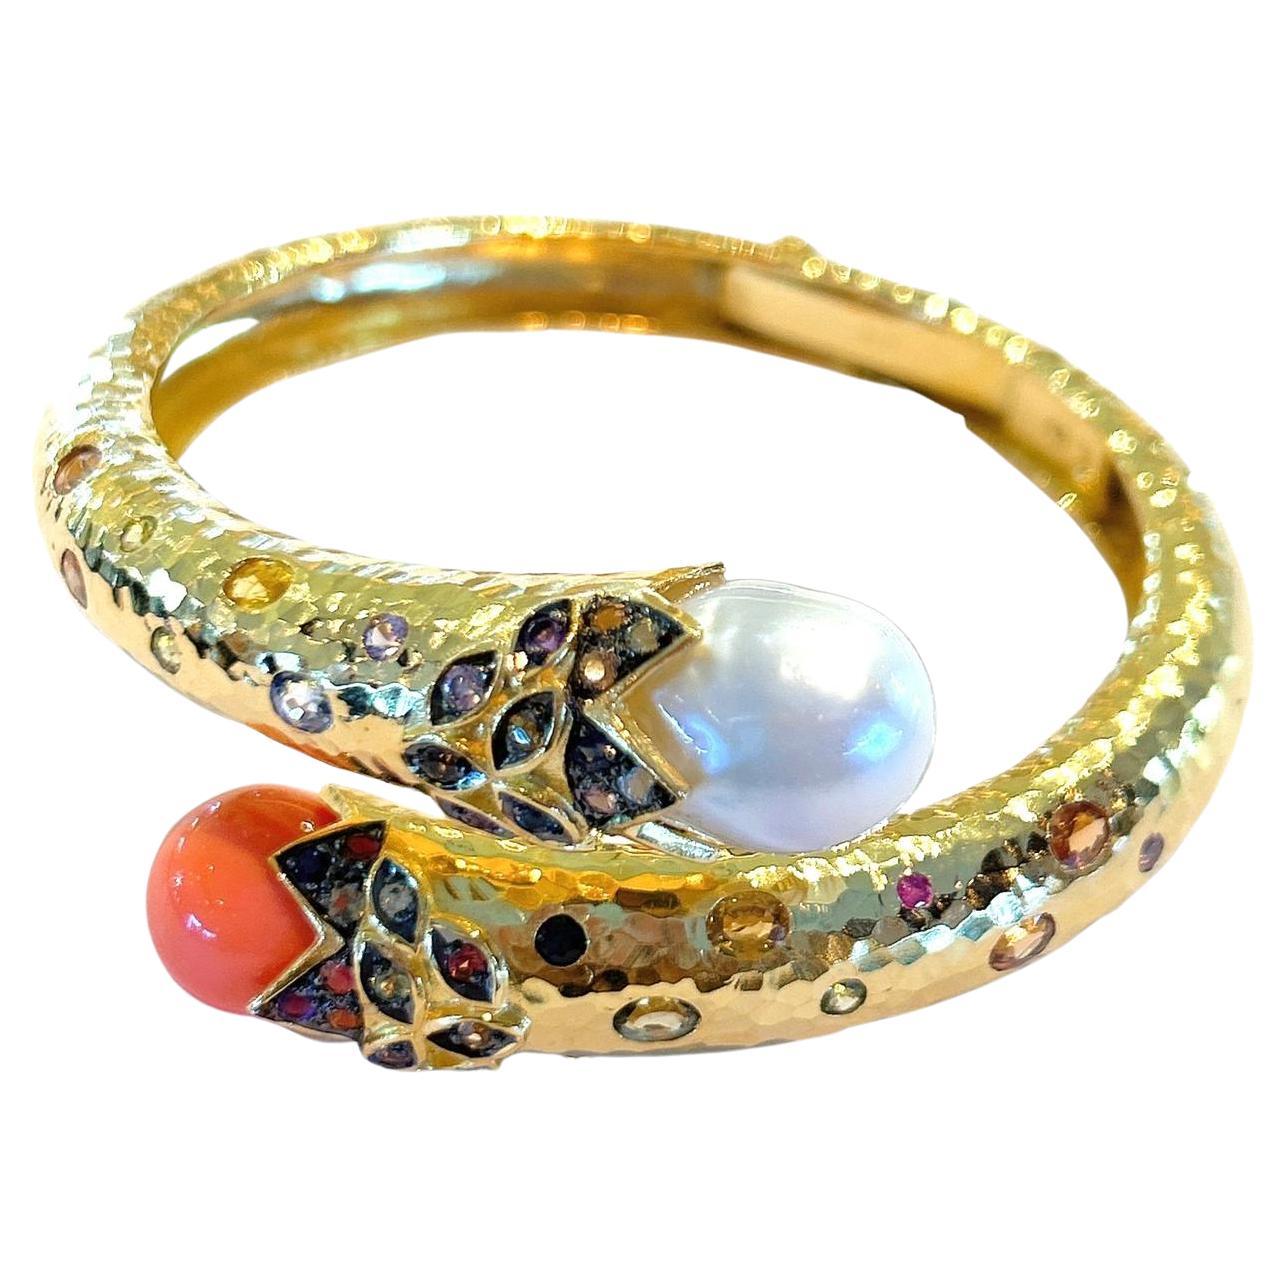 Bochic “Orient” Bangle set 22K Gold & Silver with Pearls & Coral and Sapphires 
White South Sea pearls white color, silver tone 
Natural Multi Color Sapphire from Sri Lankan  - 3 carats 
Sapphire colors, Red, Orange, Blue, Yellow and Pink
Set in 22K